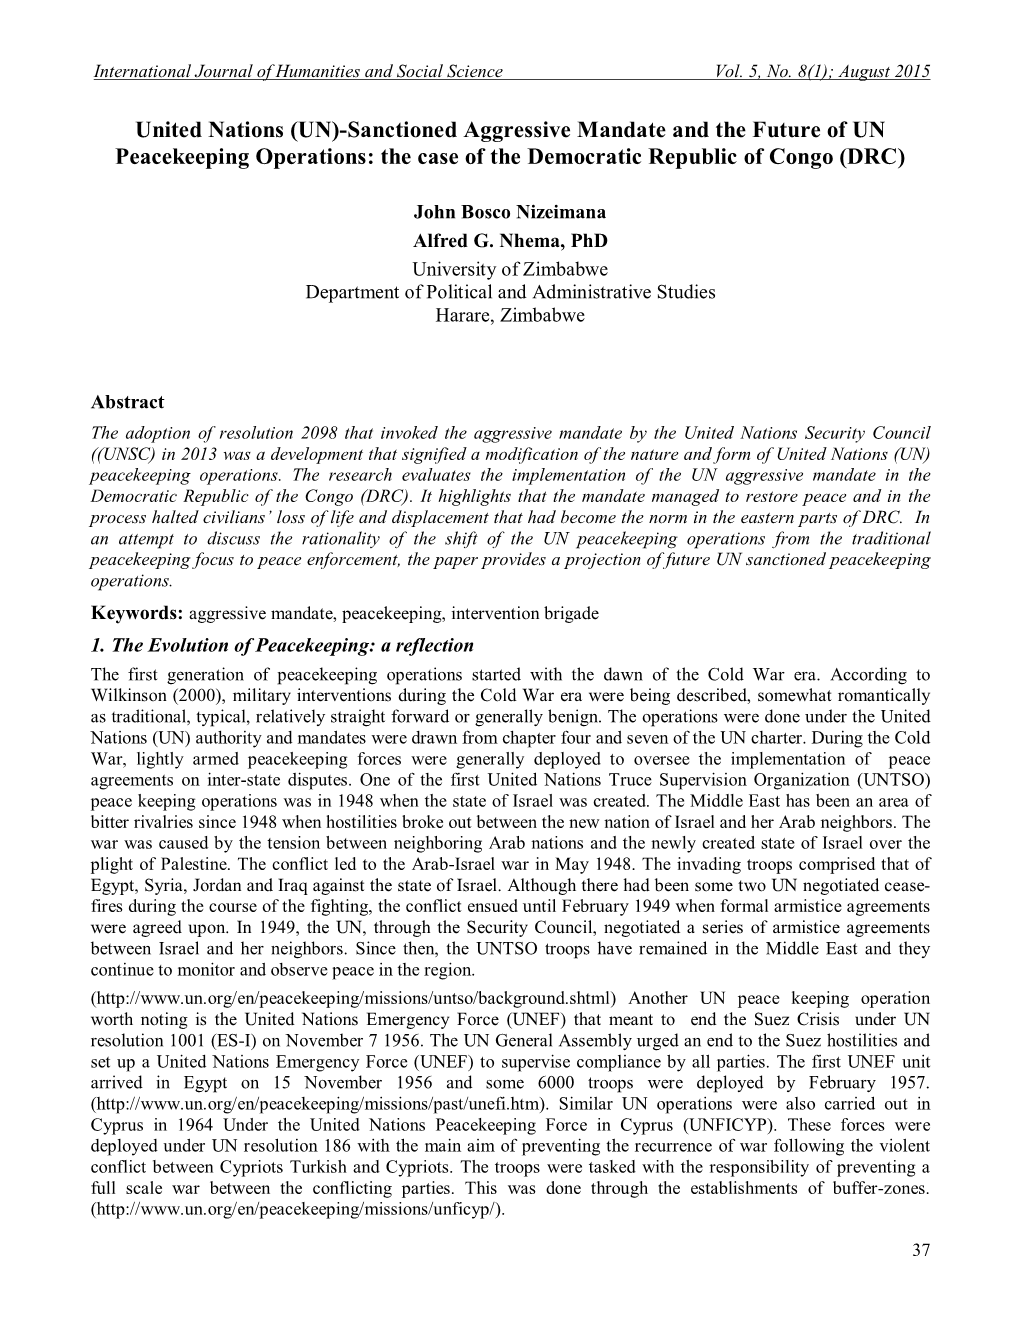 Sanctioned Aggressive Mandate and the Future of UN Peacekeeping Operations: the Case of the Democratic Republic of Congo (DRC)